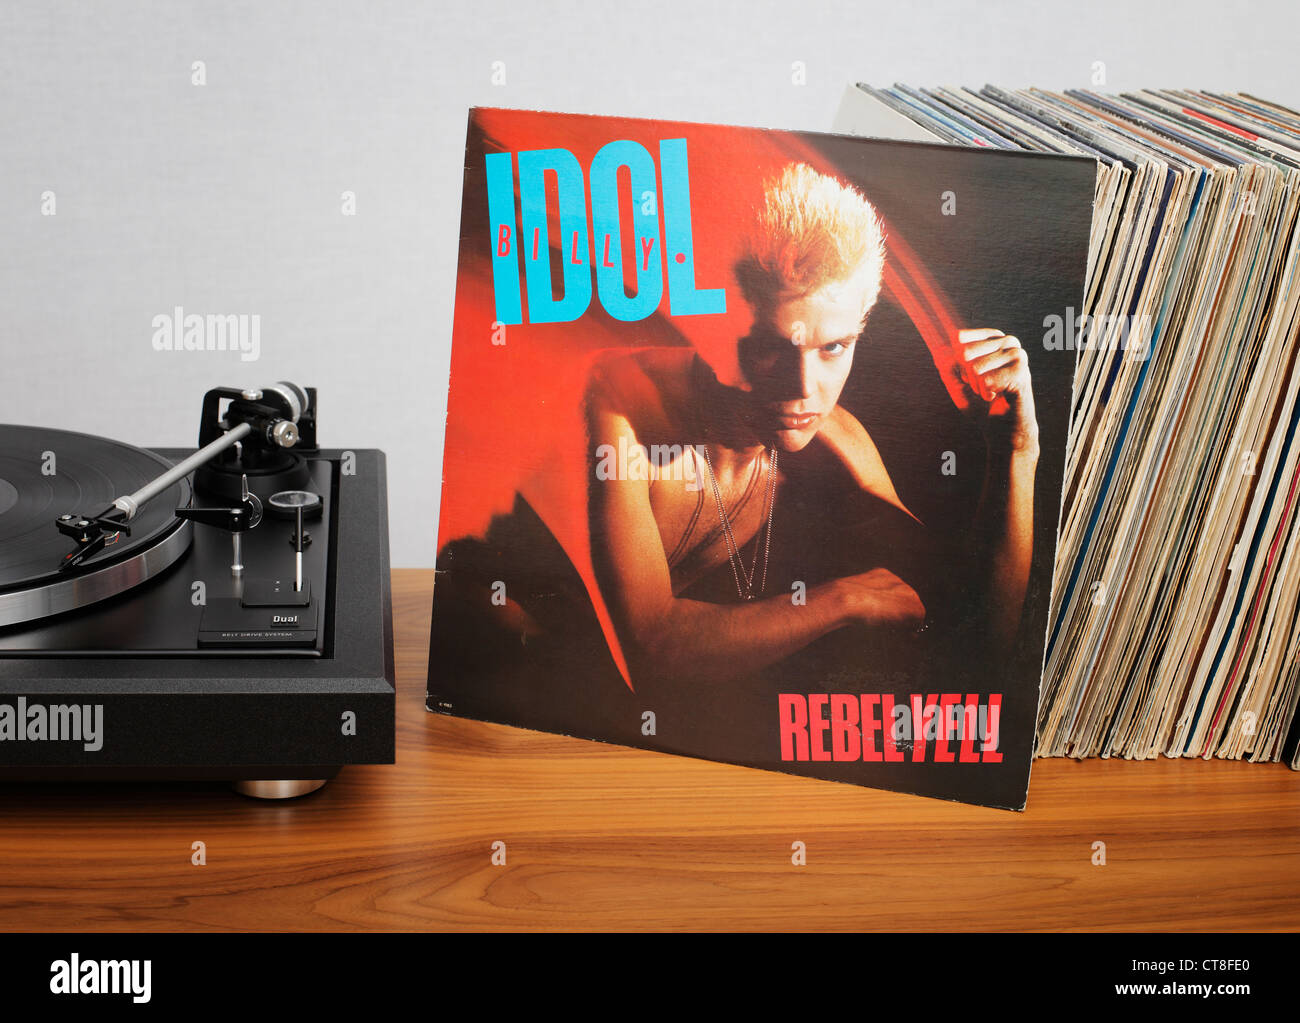 Rebel Yell is the second album by British punk rock artist Billy Idol, released in 1983. Stock Photo